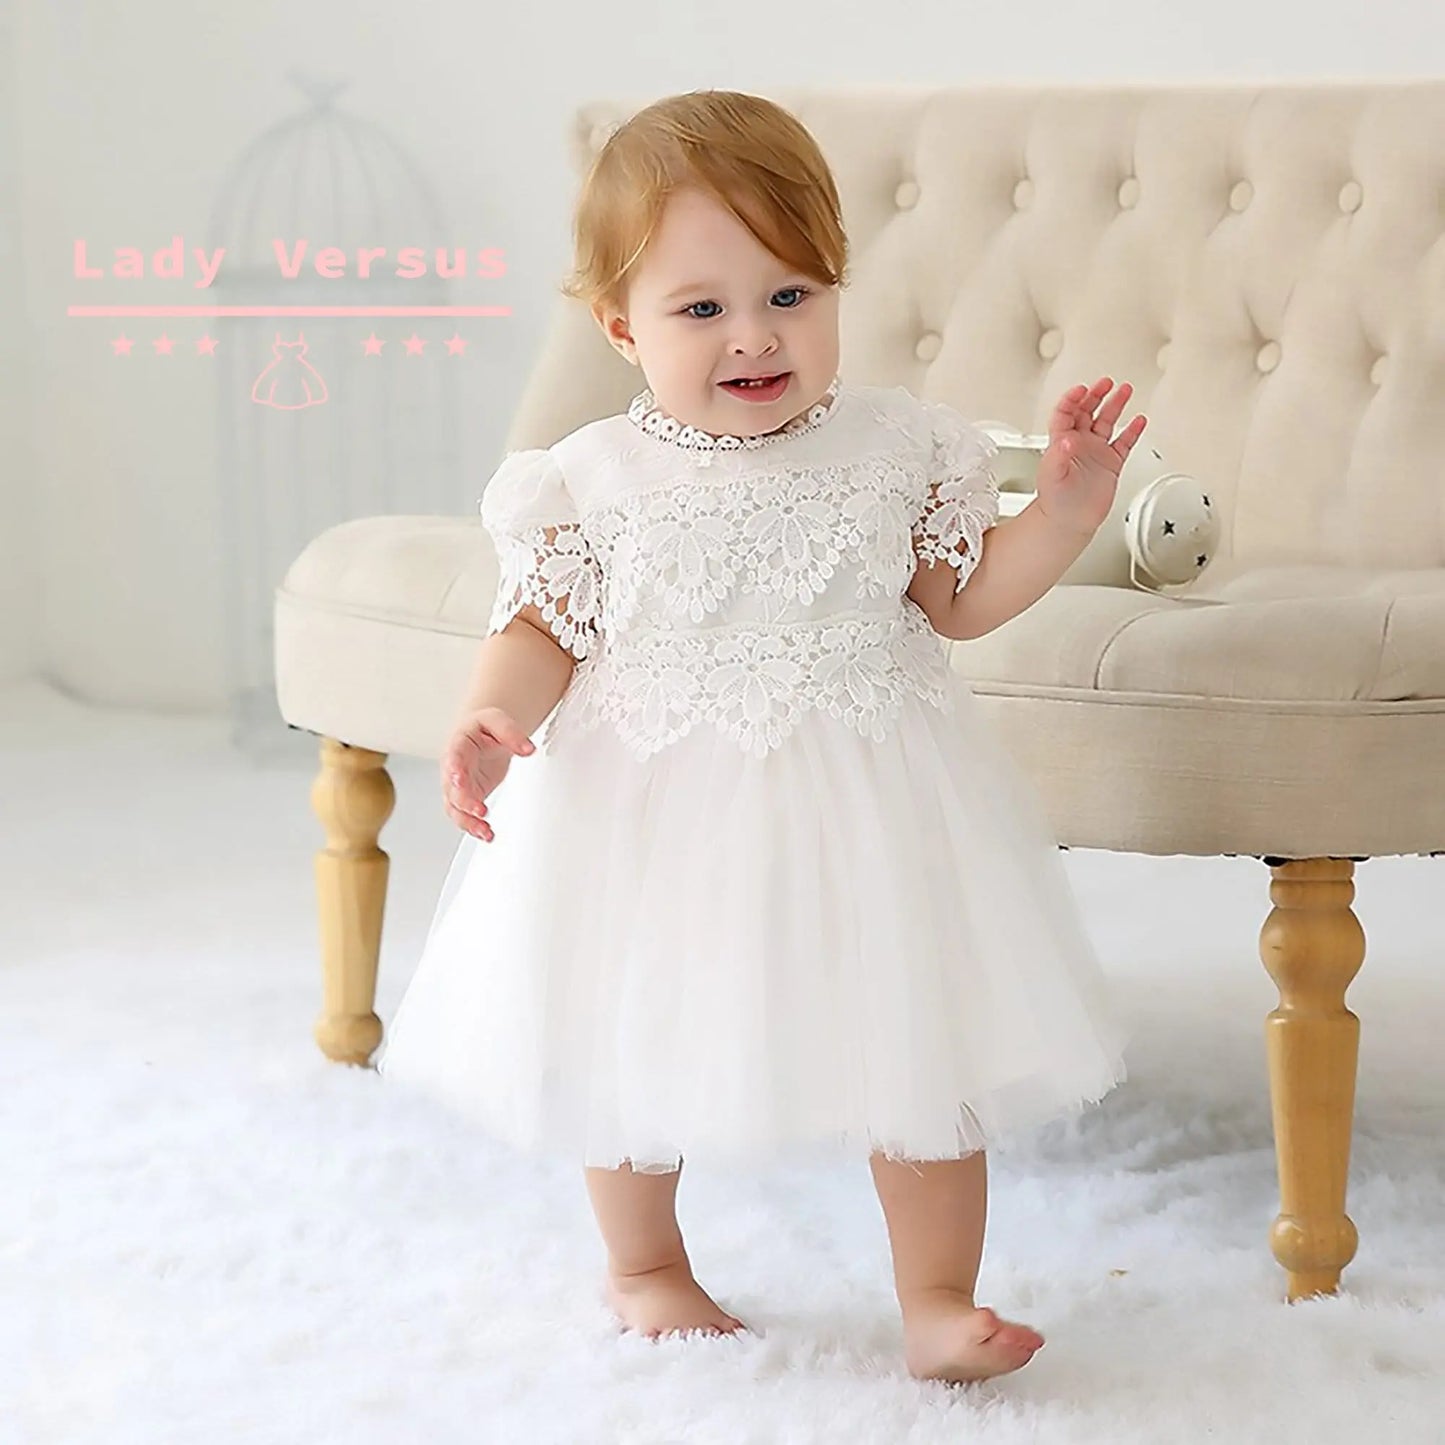 White Baby Girl Baptism Dress / Newborn Baby Girl Christening Gown/ Baby Girl Baptism Outfit/ birthday princess gown / baby white dress Lady Versus